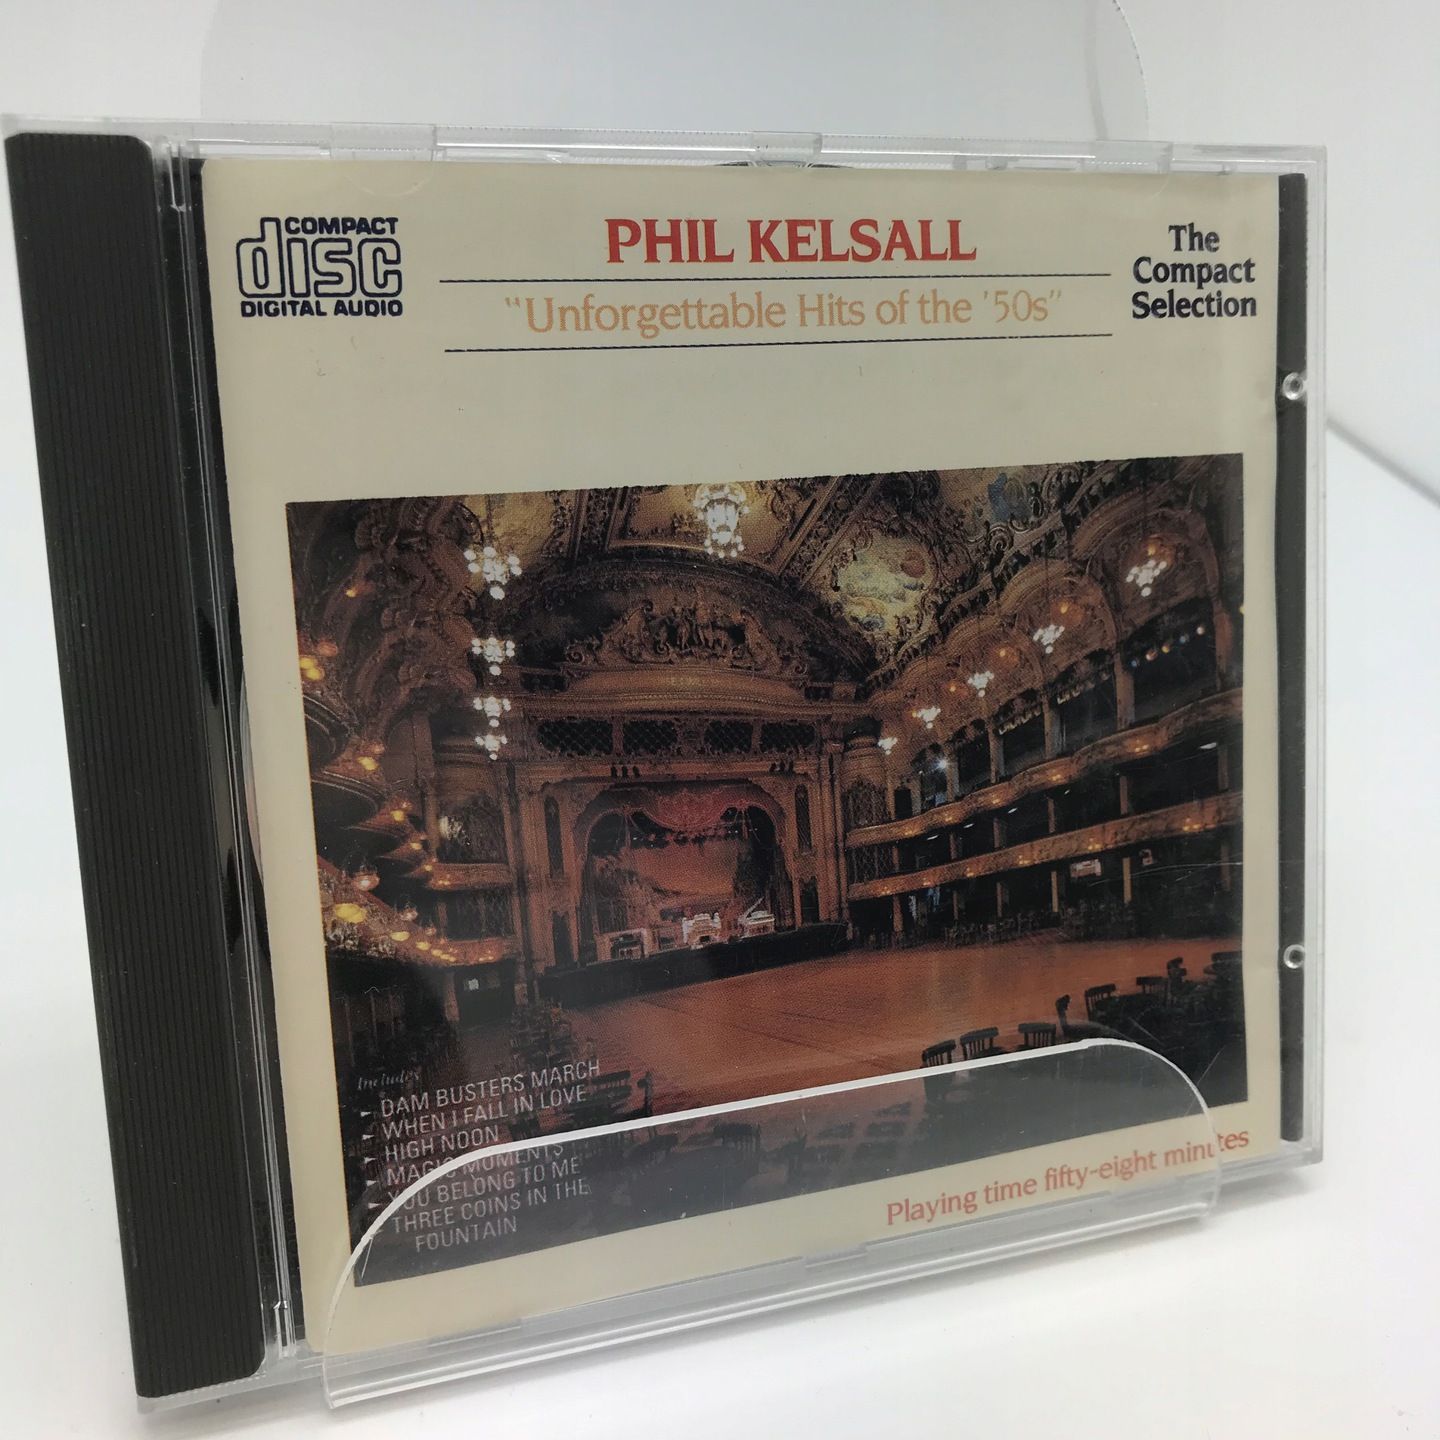 Cd - Phil Kelsall - Unforgettable Hits Of The 50s